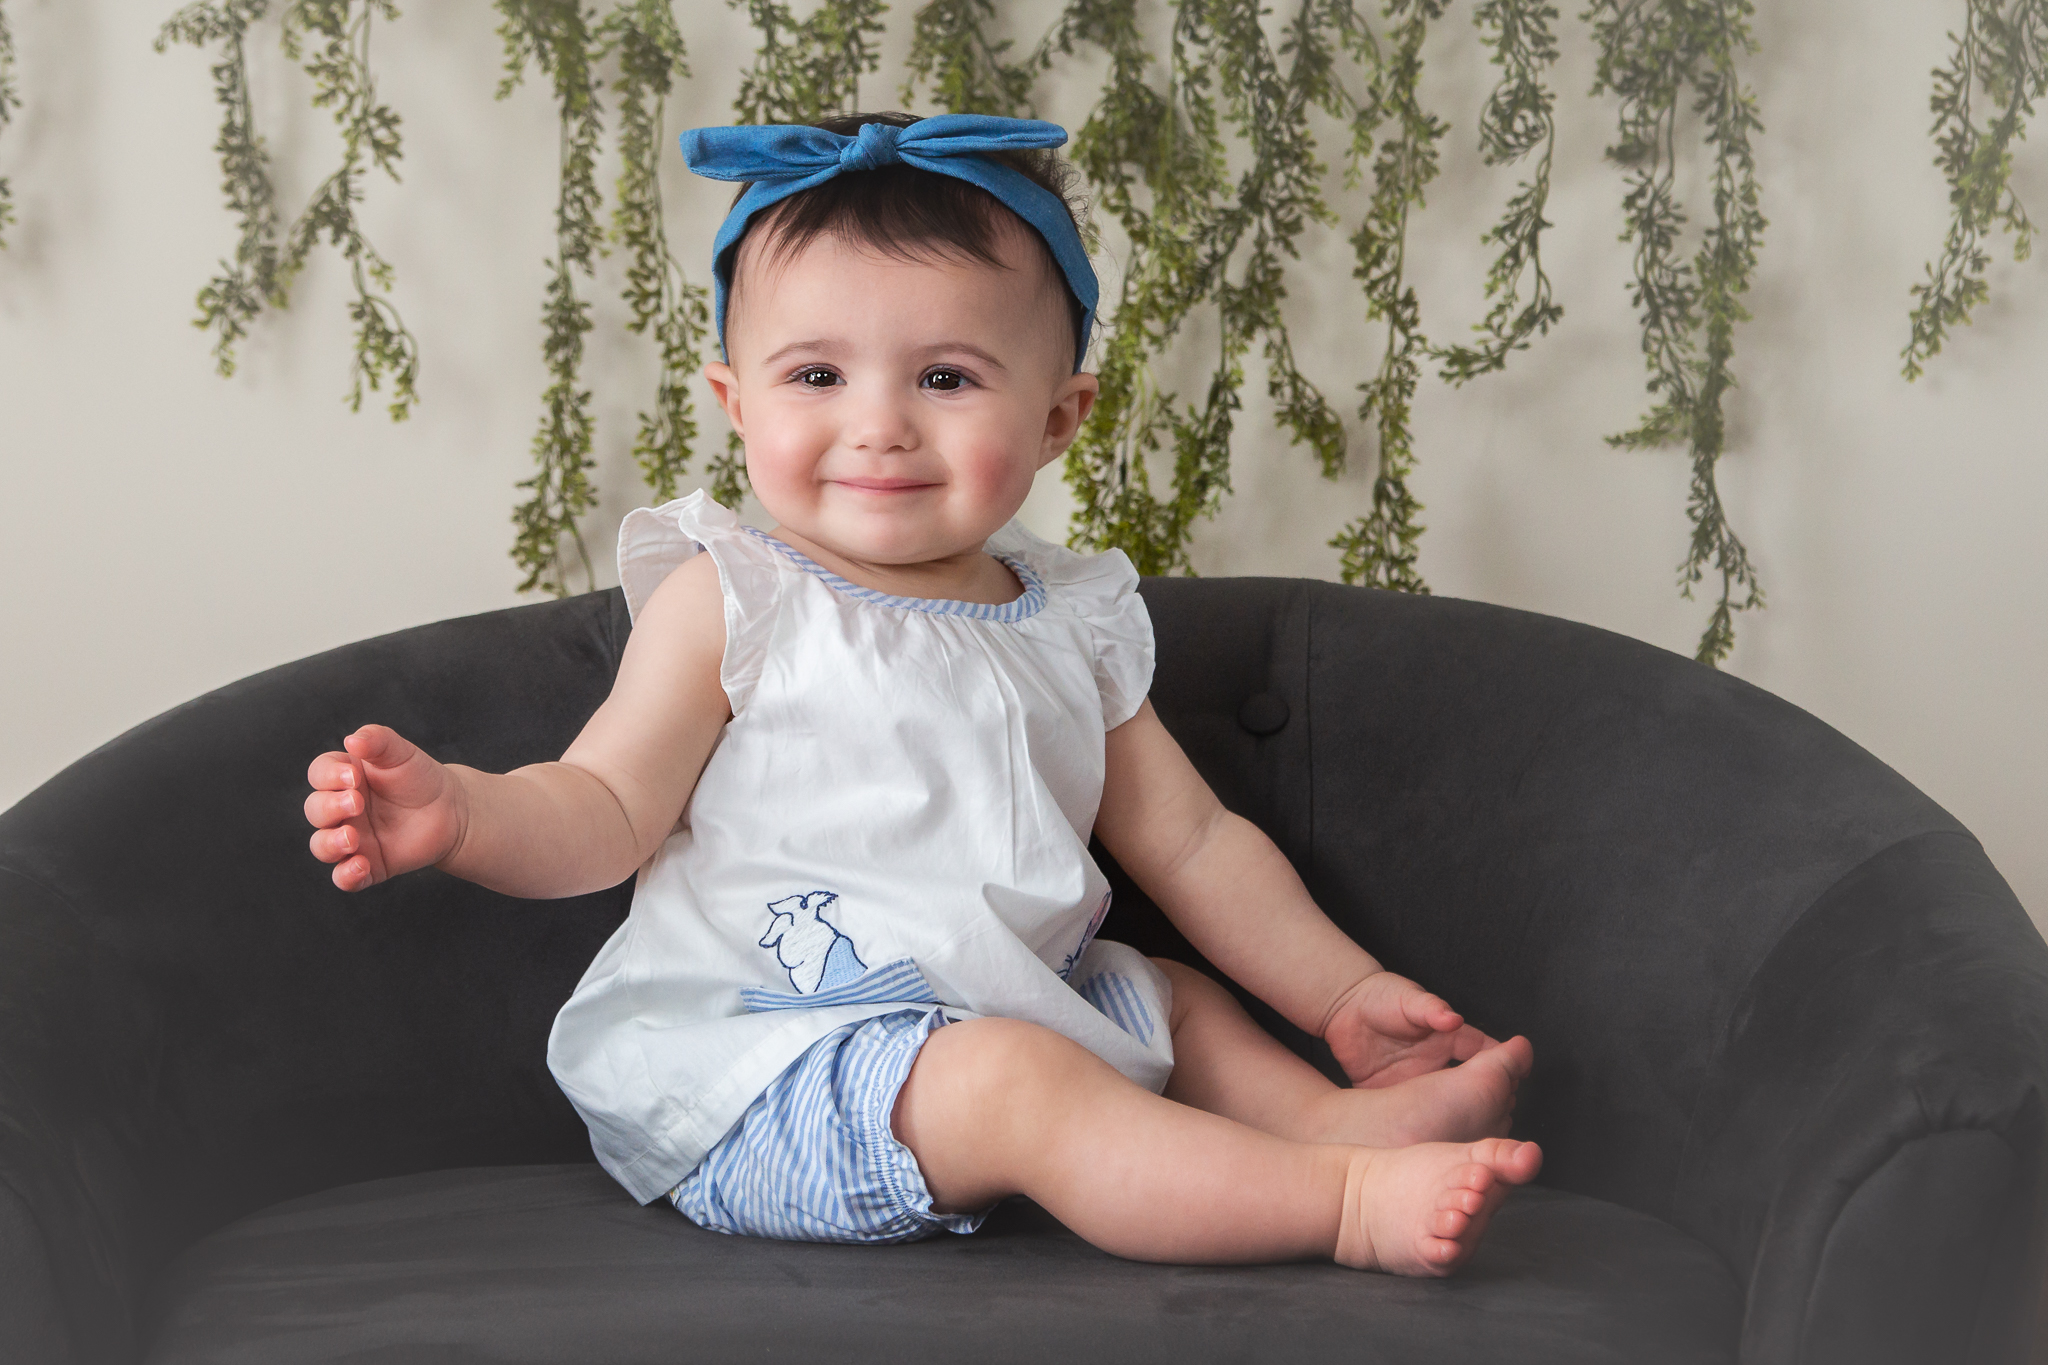 E's Studio Sitter Session, Watch Me Grow, Baby, Child, Model, Photography, Session, Casi Ann Photography, studio, 6 month, 9 month, milestone, sitter, 8 month, flower crown, halo, vines, flowers, ingleside, crystal lake, illinois, portrait, kids